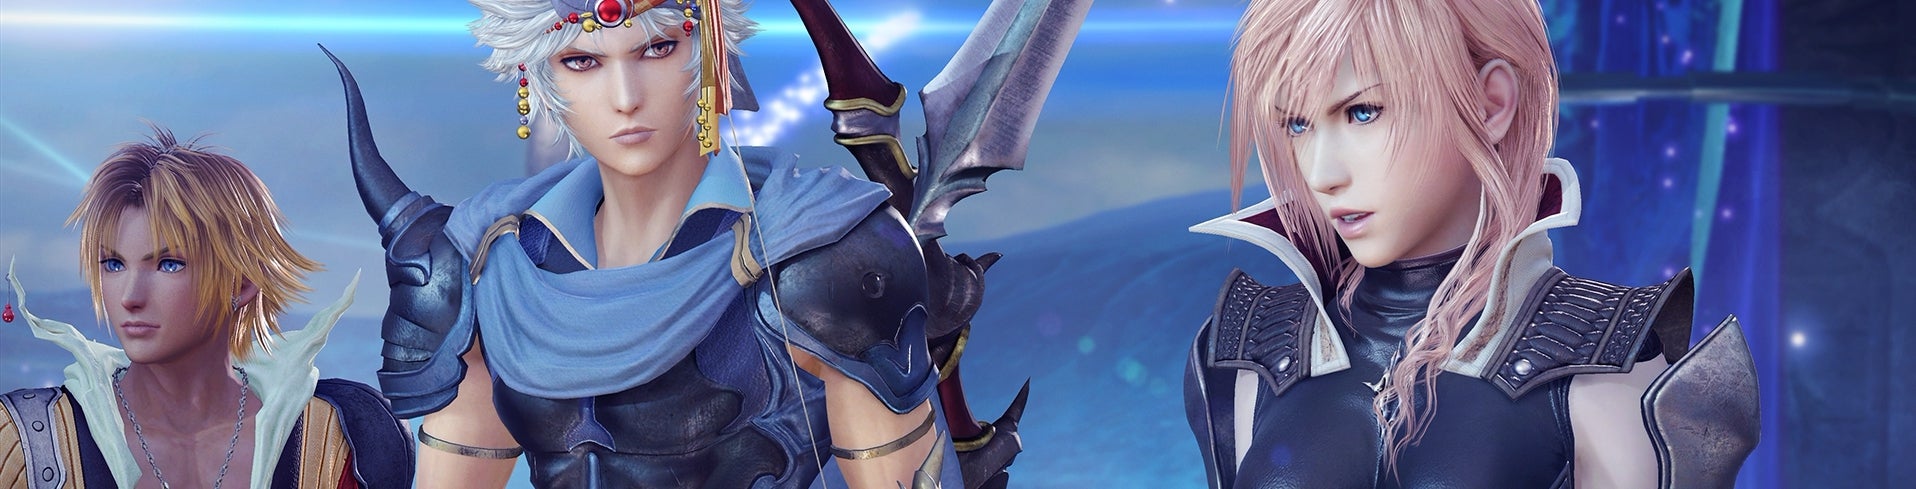 Image for Dissidia Final Fantasy NT review - fan-service fighter is charming but chaotic